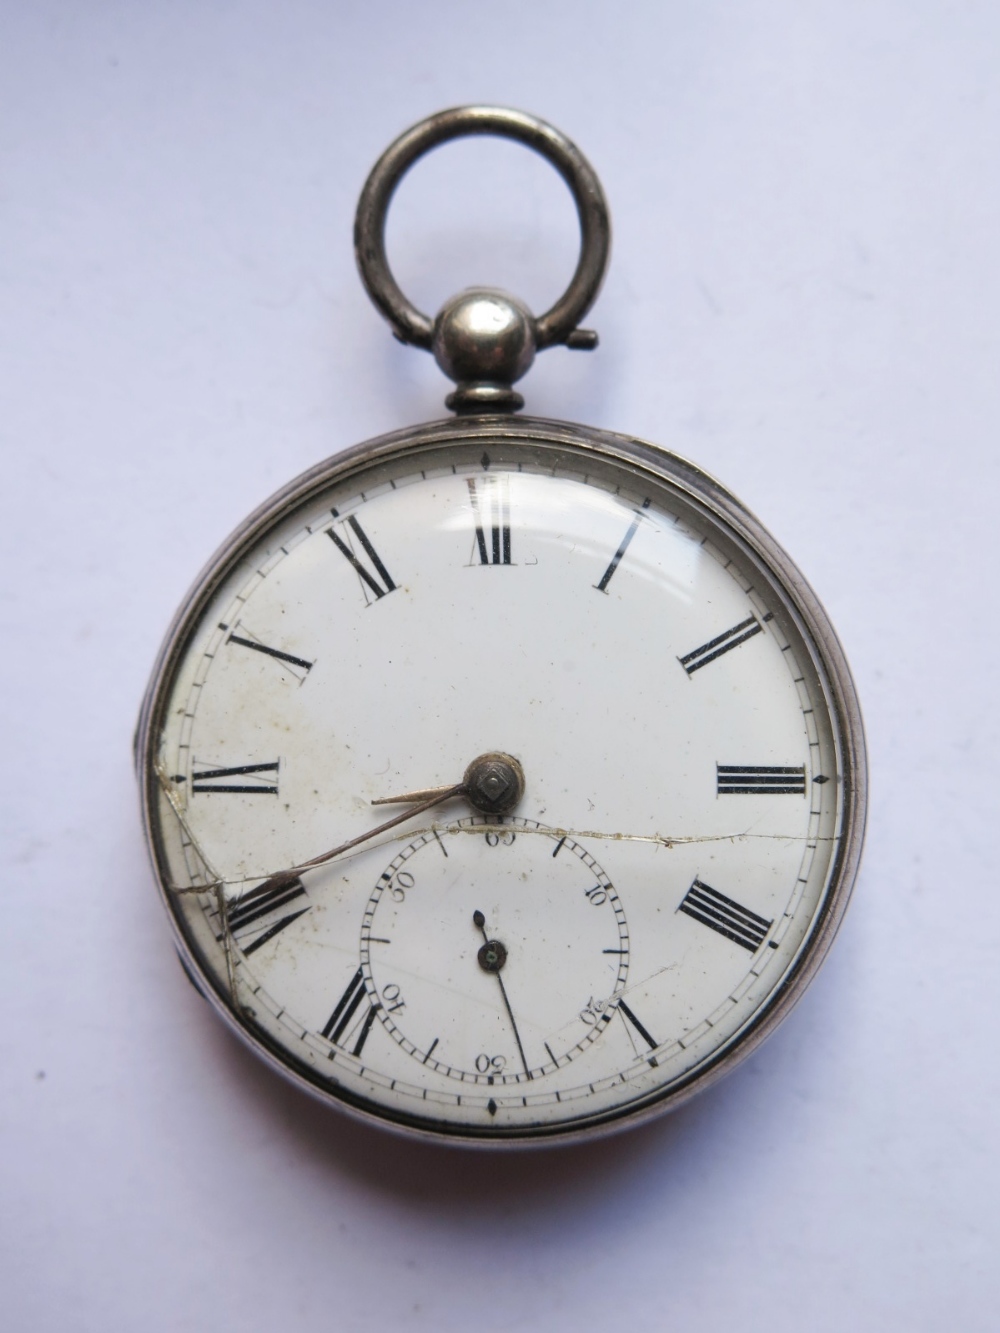 A C. Lupton Silver Cased Pocket Watch 15904, London 1857, glass cracked